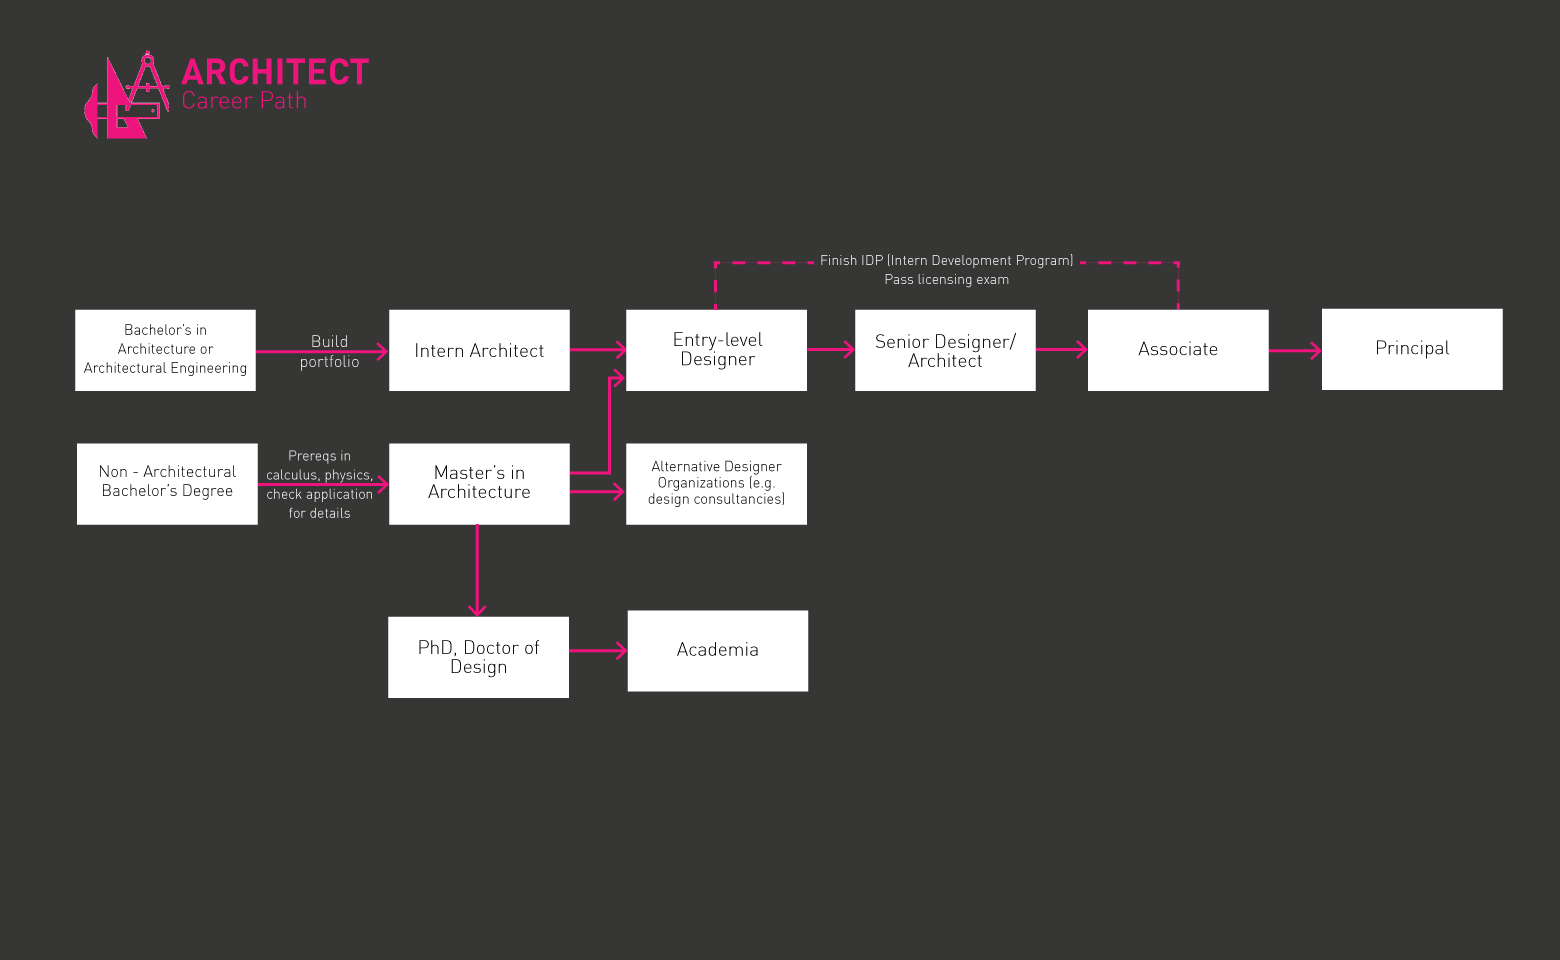 Typical Roadmap for Architect